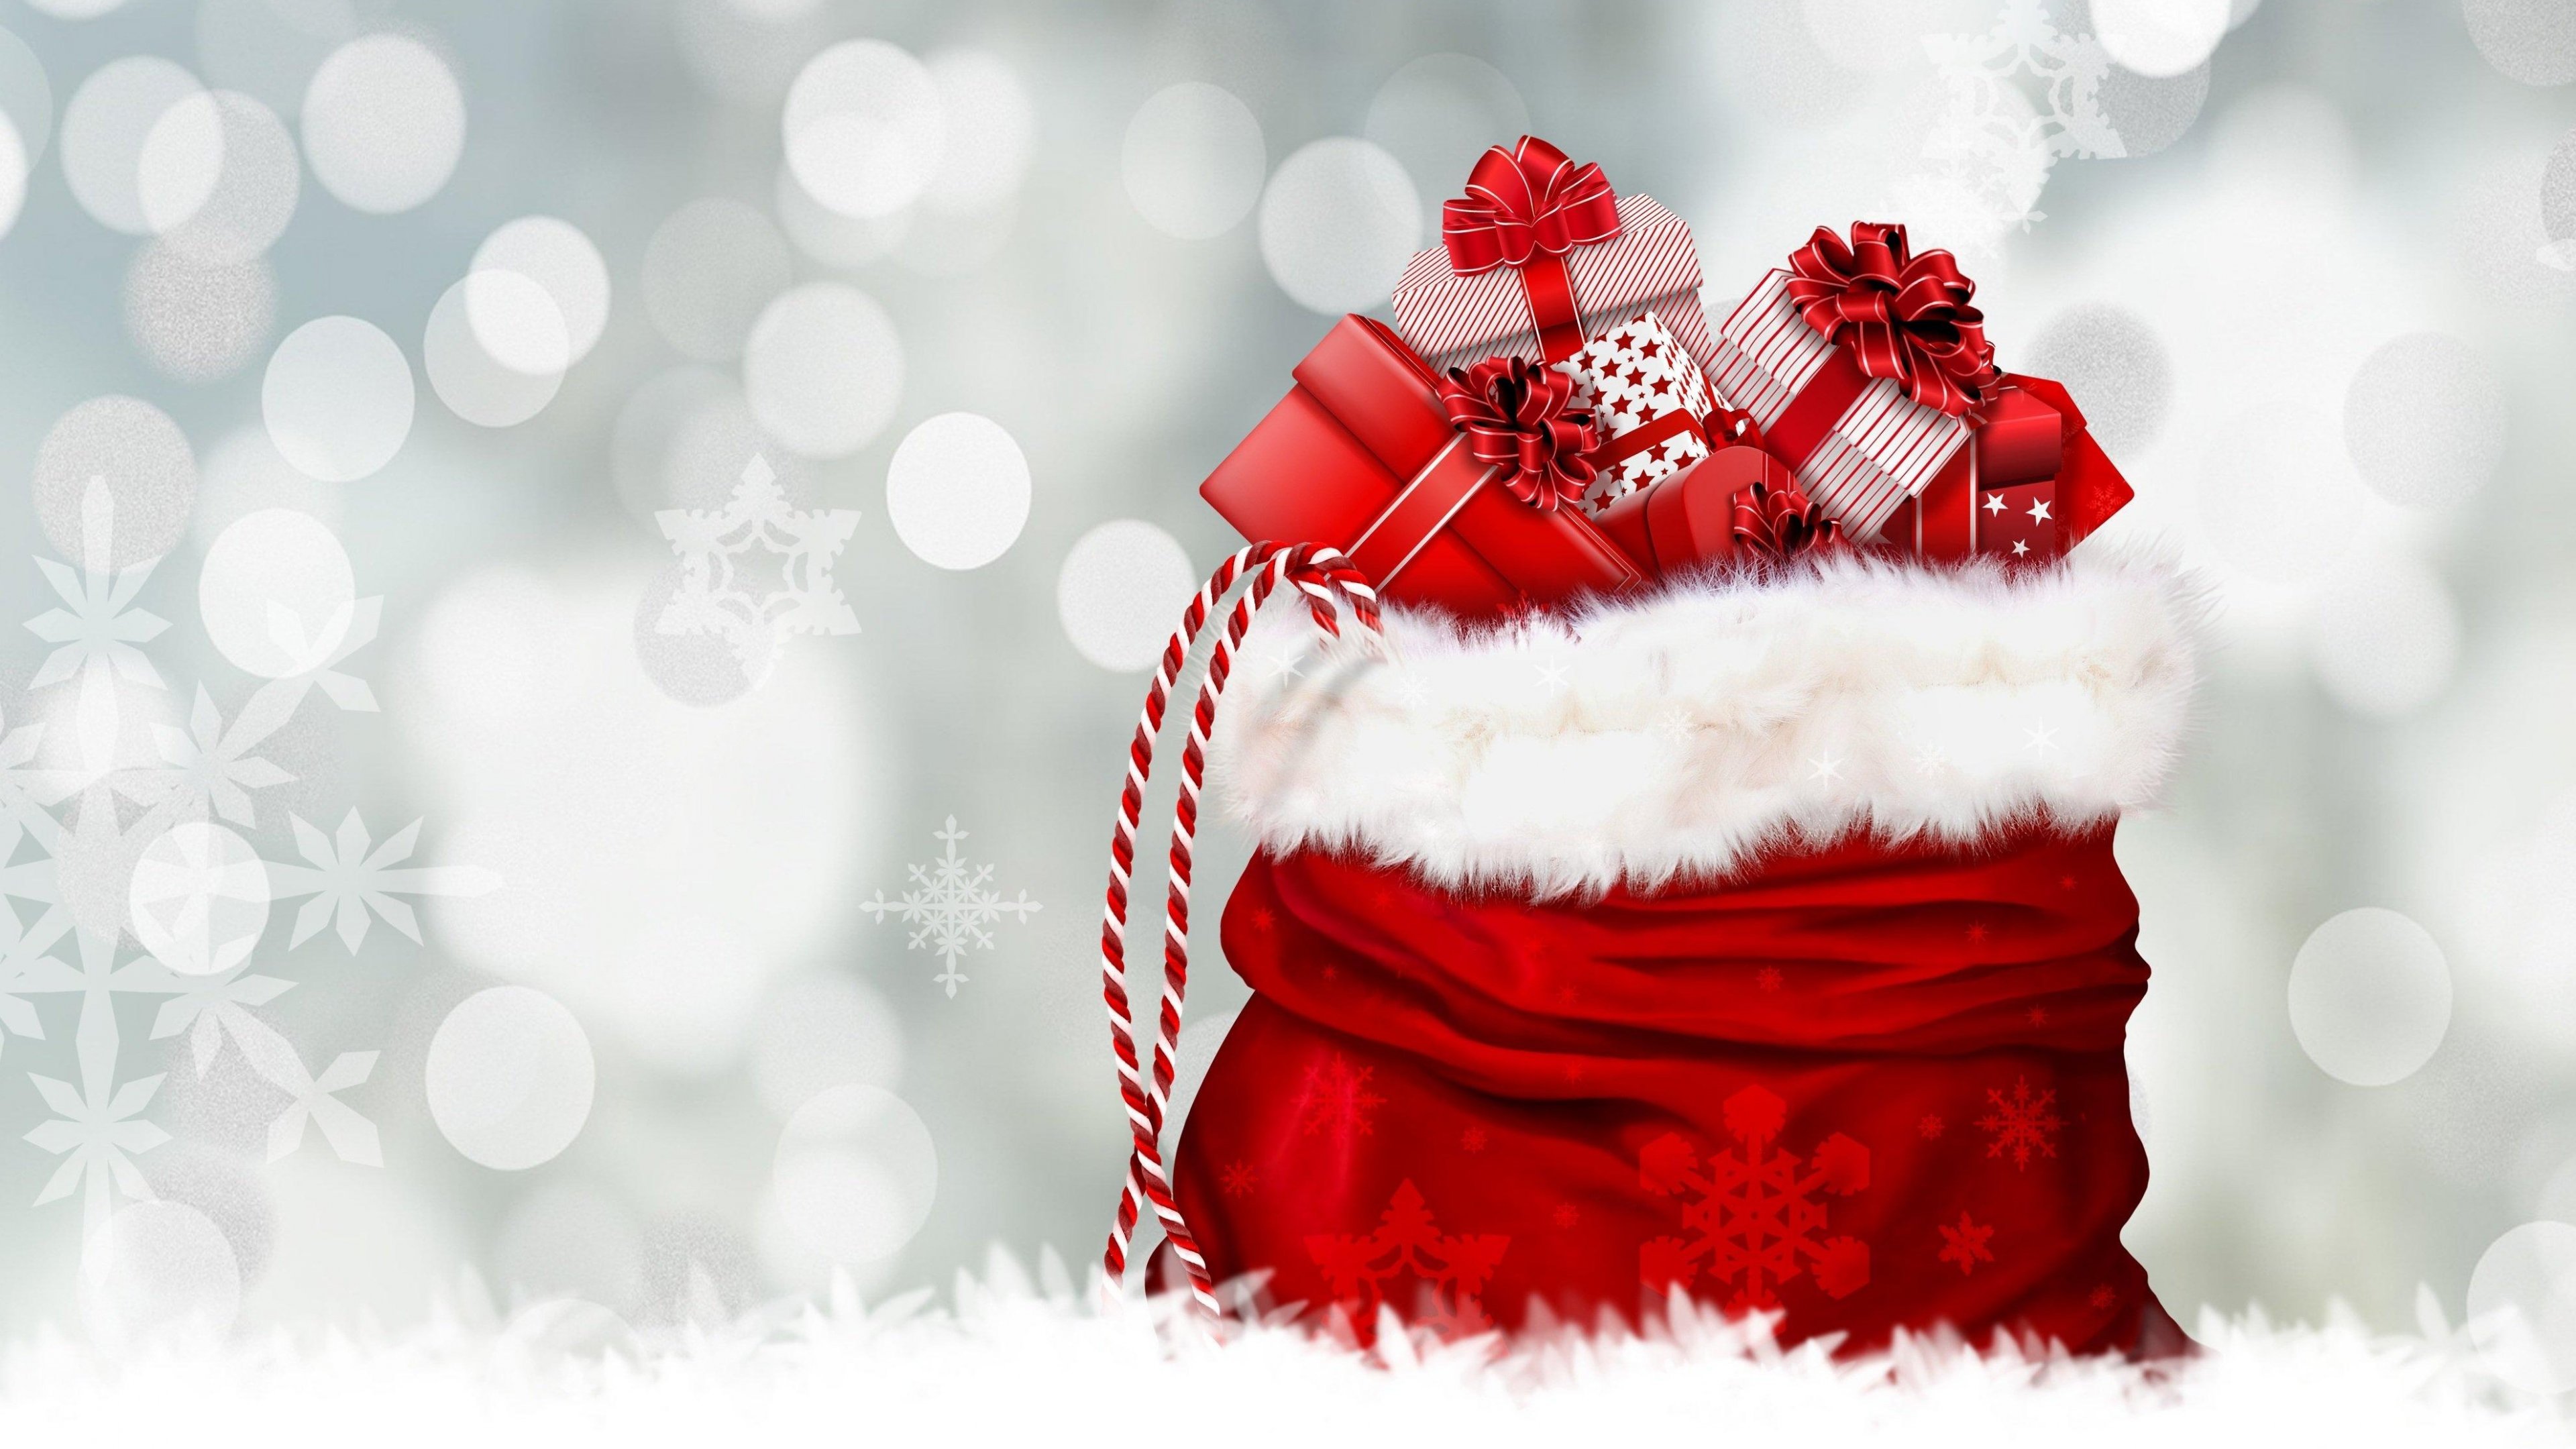 Christmas Gifts from Santa Wallpaper - iPhone, Android & Desktop Backgrounds